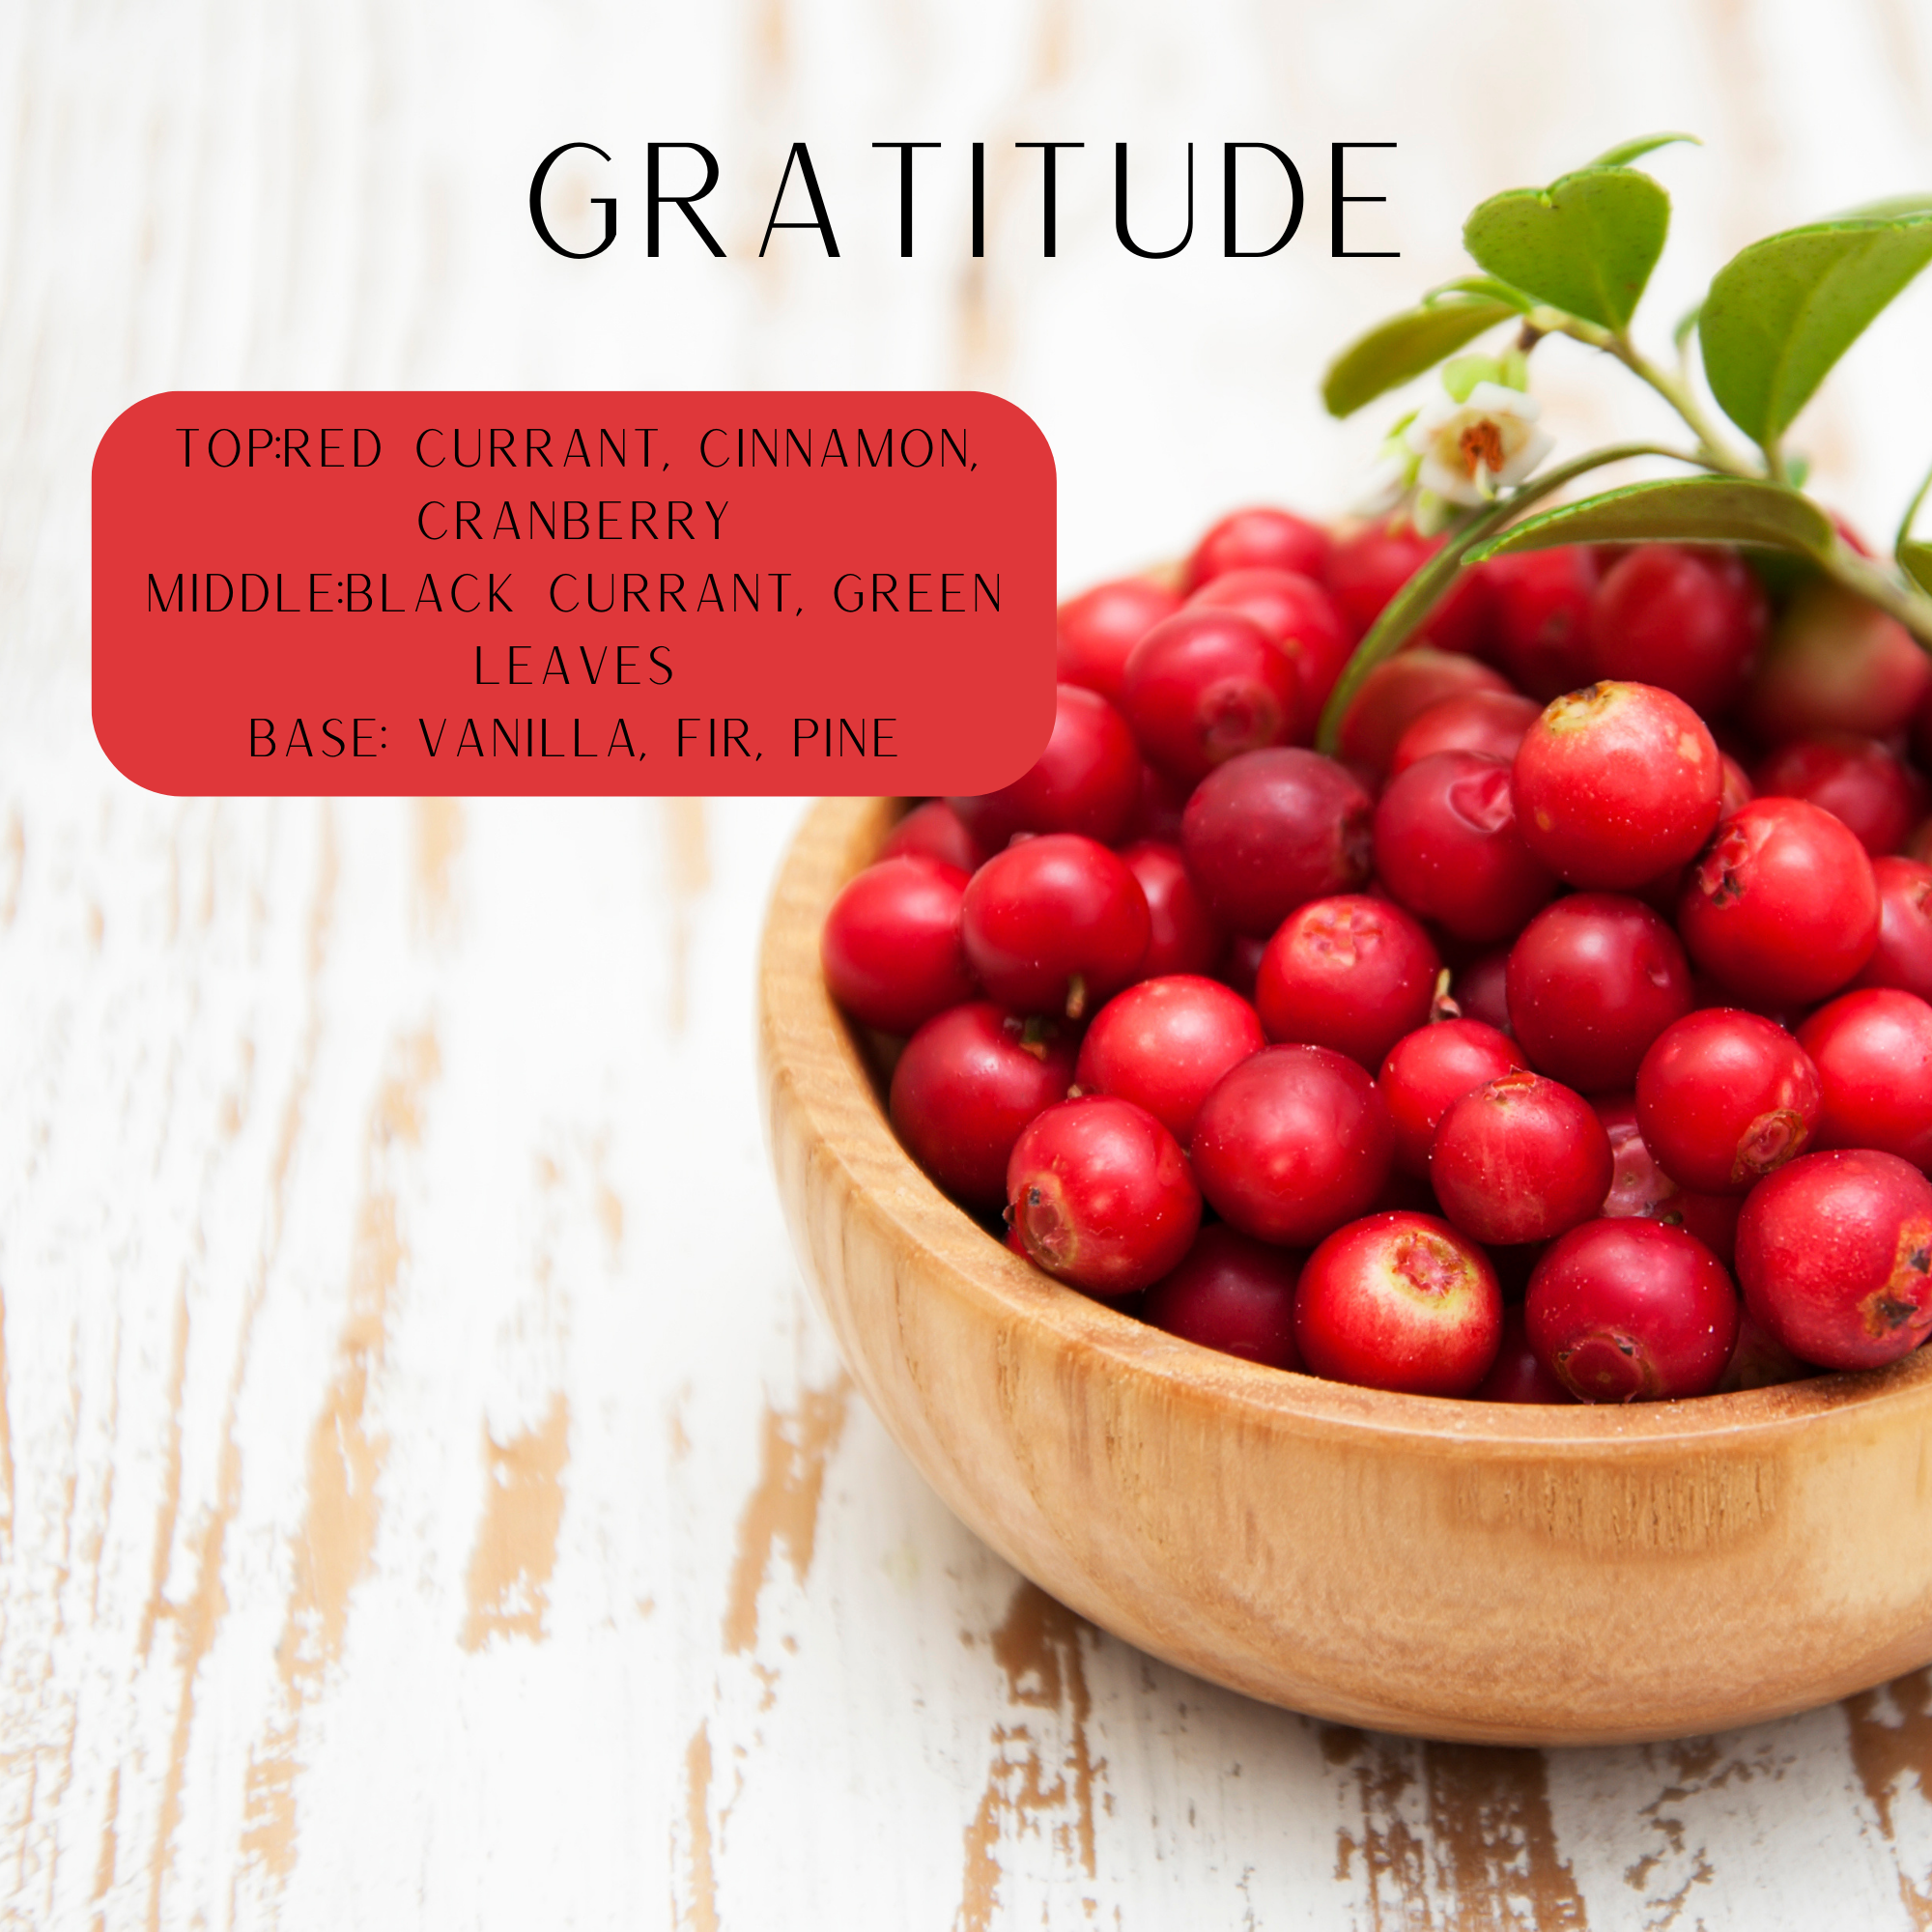 a wooden bowl filled with cranberries on a light distressed wooden plank floor says gratitude top: red currant, cinnamon, cranberry middle : black currant, green leaves base: vanilla, fir, pine